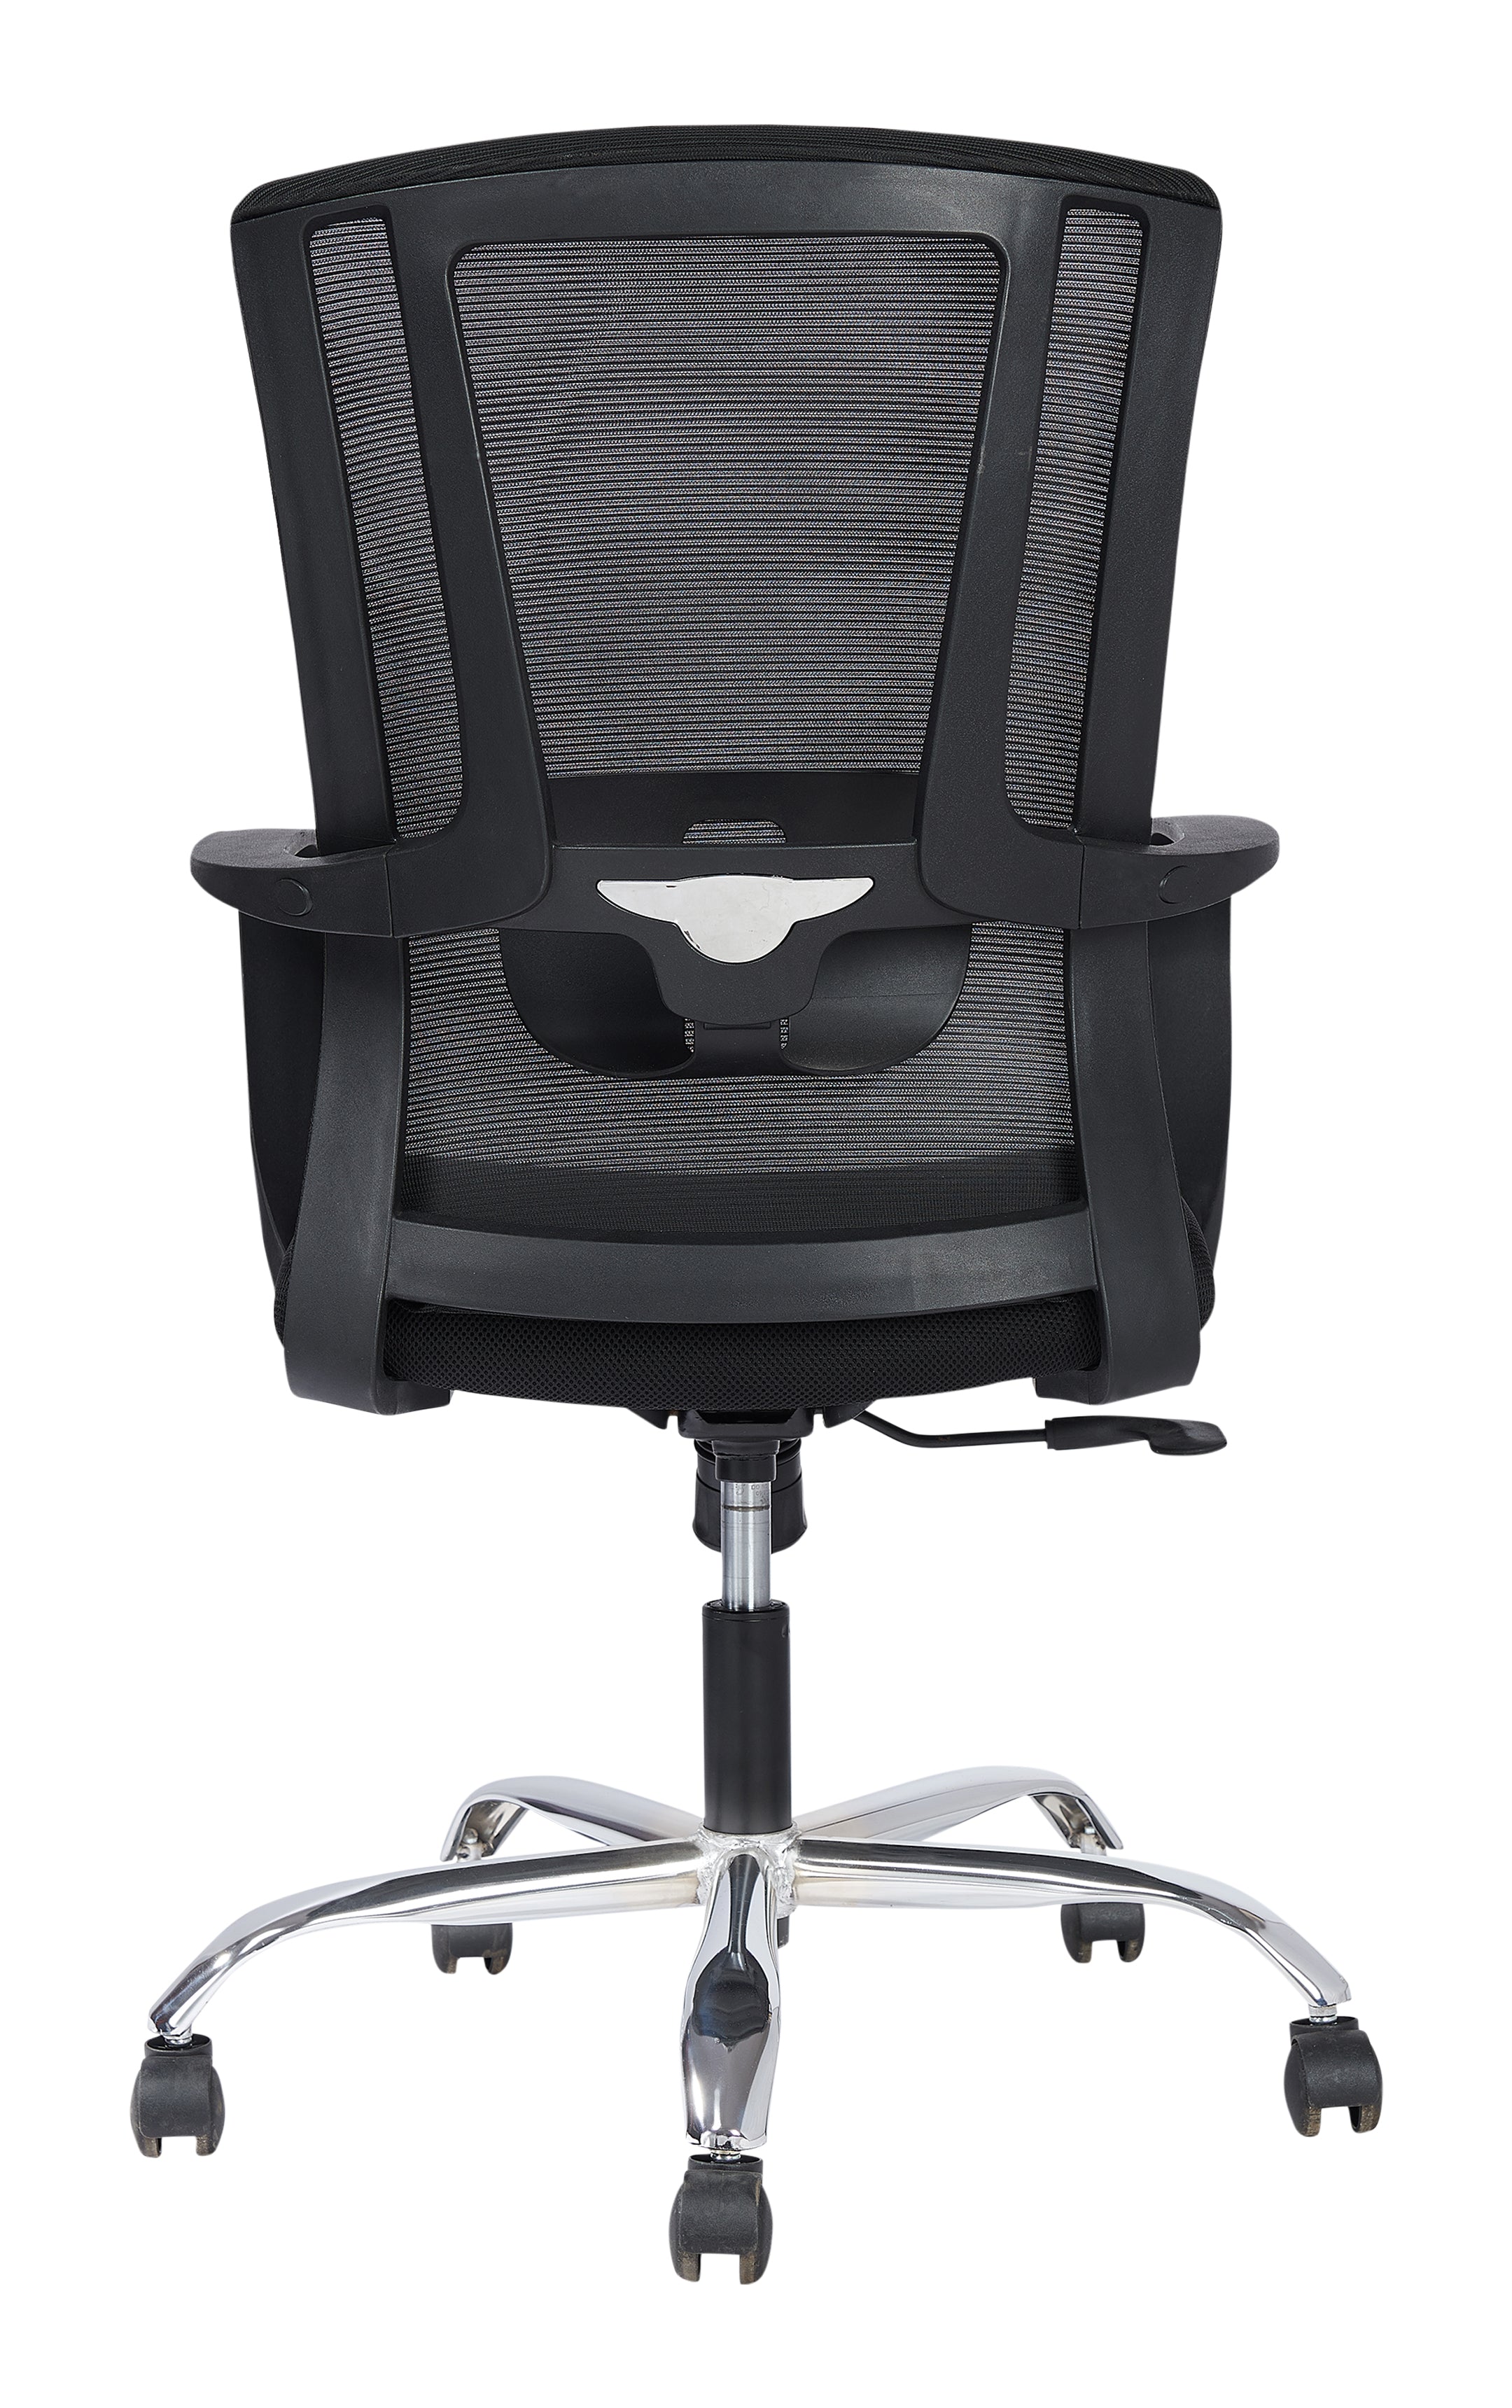 Eiger Mid Back Office Work Station Chair with Cushion Seat And Chrome Base - Black